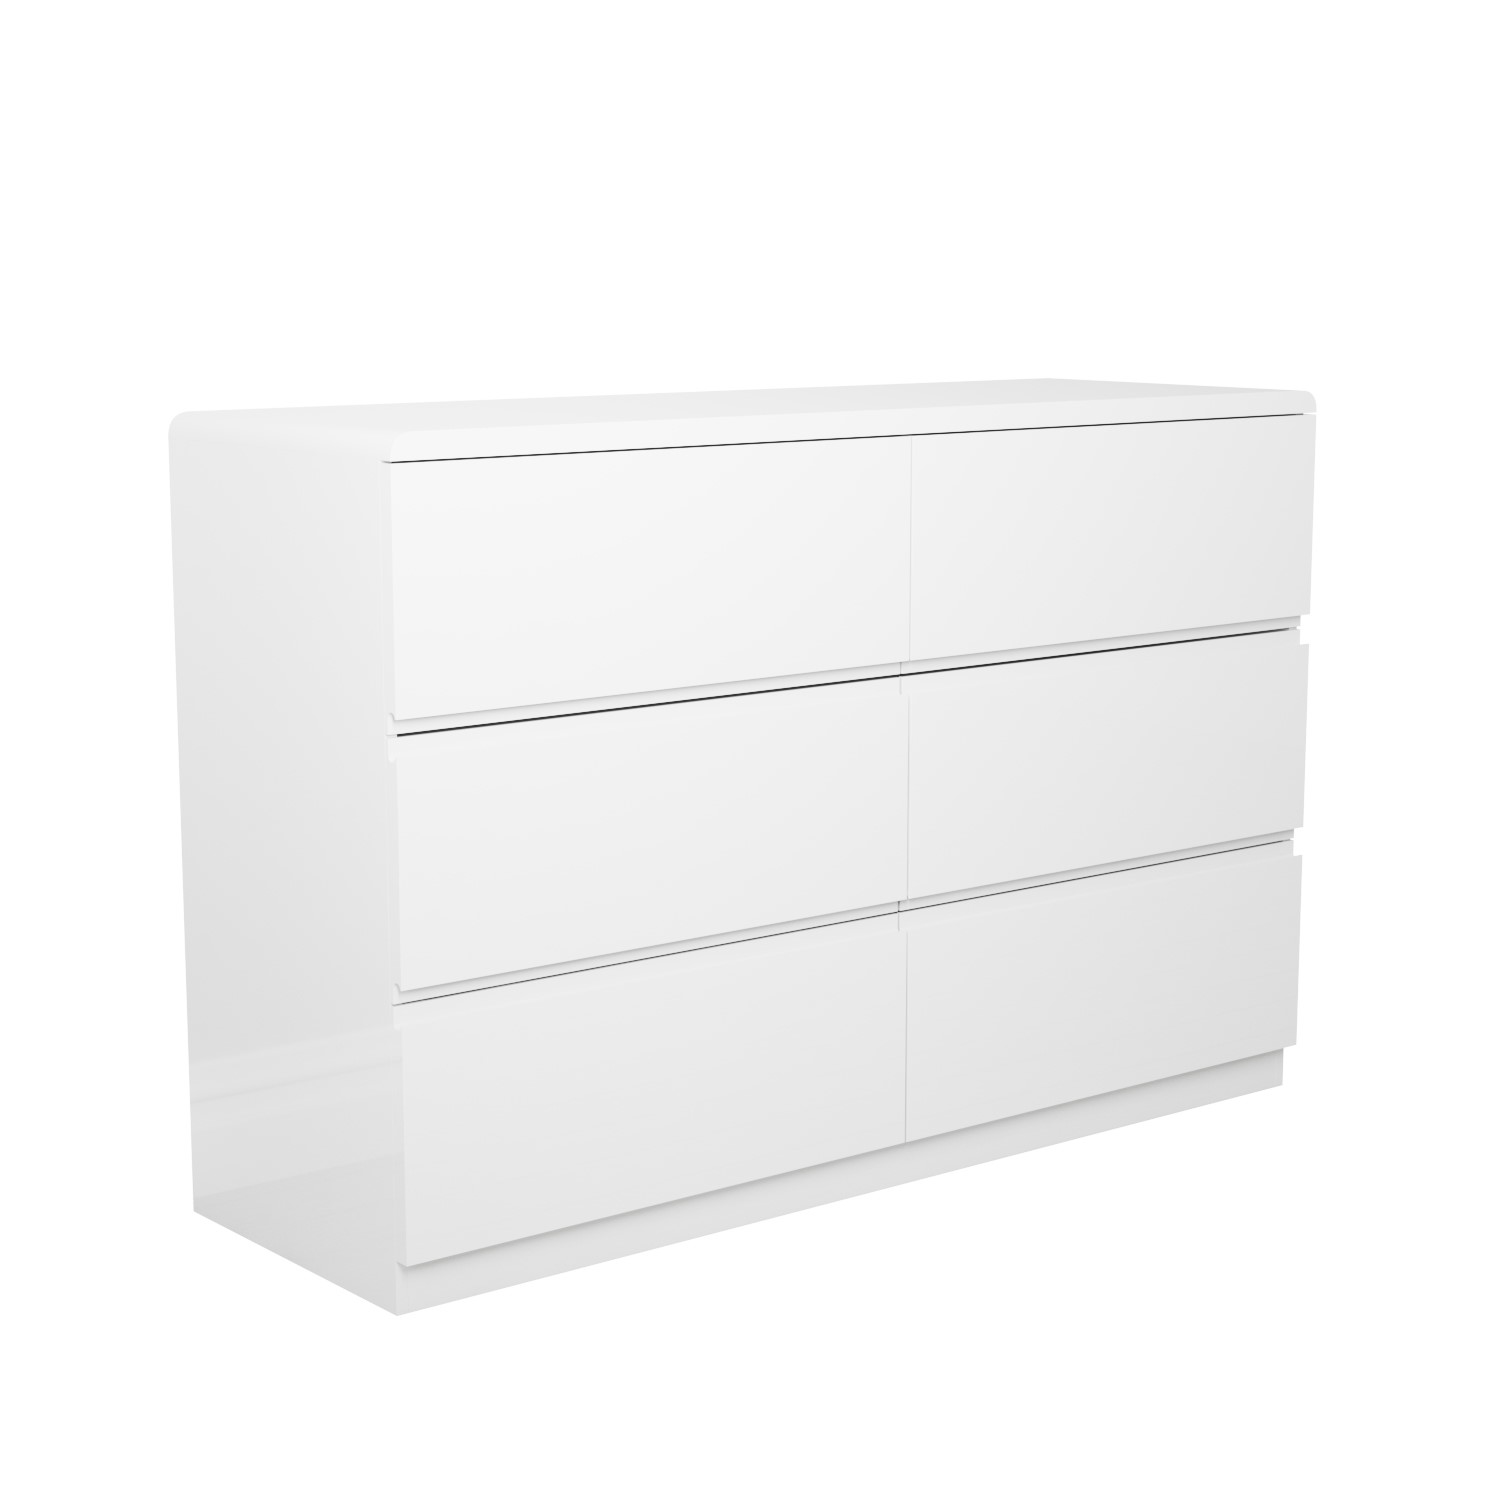 Read more about Small 6 drawer chest of drawers in white gloss lyra